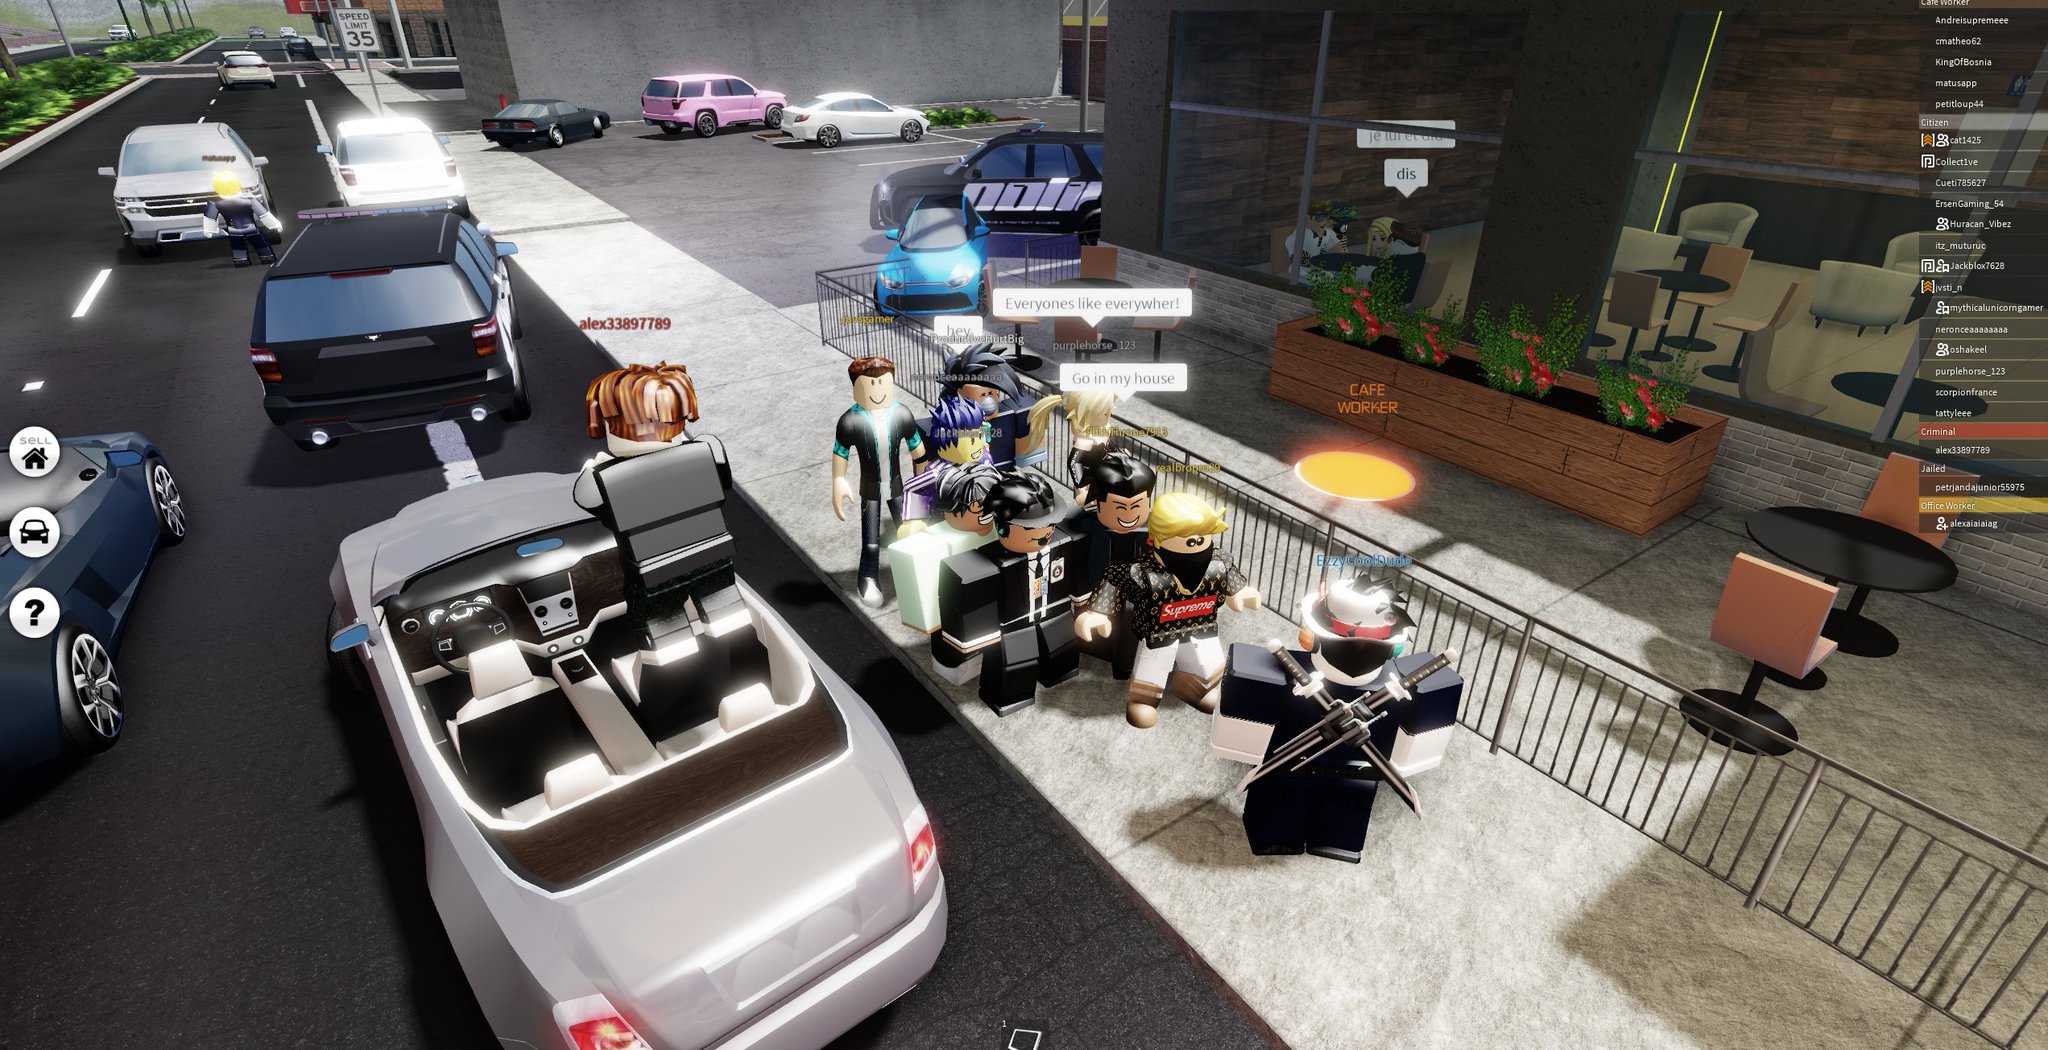 Collect1ve On Twitter Love Meeting The Community Great Bunch Of Players With Some Great Questions And Suggestions Thanks For Playing Pacifico 2 Playground Town If You Haven T Already Play Now Https T Co 3rwks1uuoq Https T Co Zdqkmrliyz - pacifico game roblox